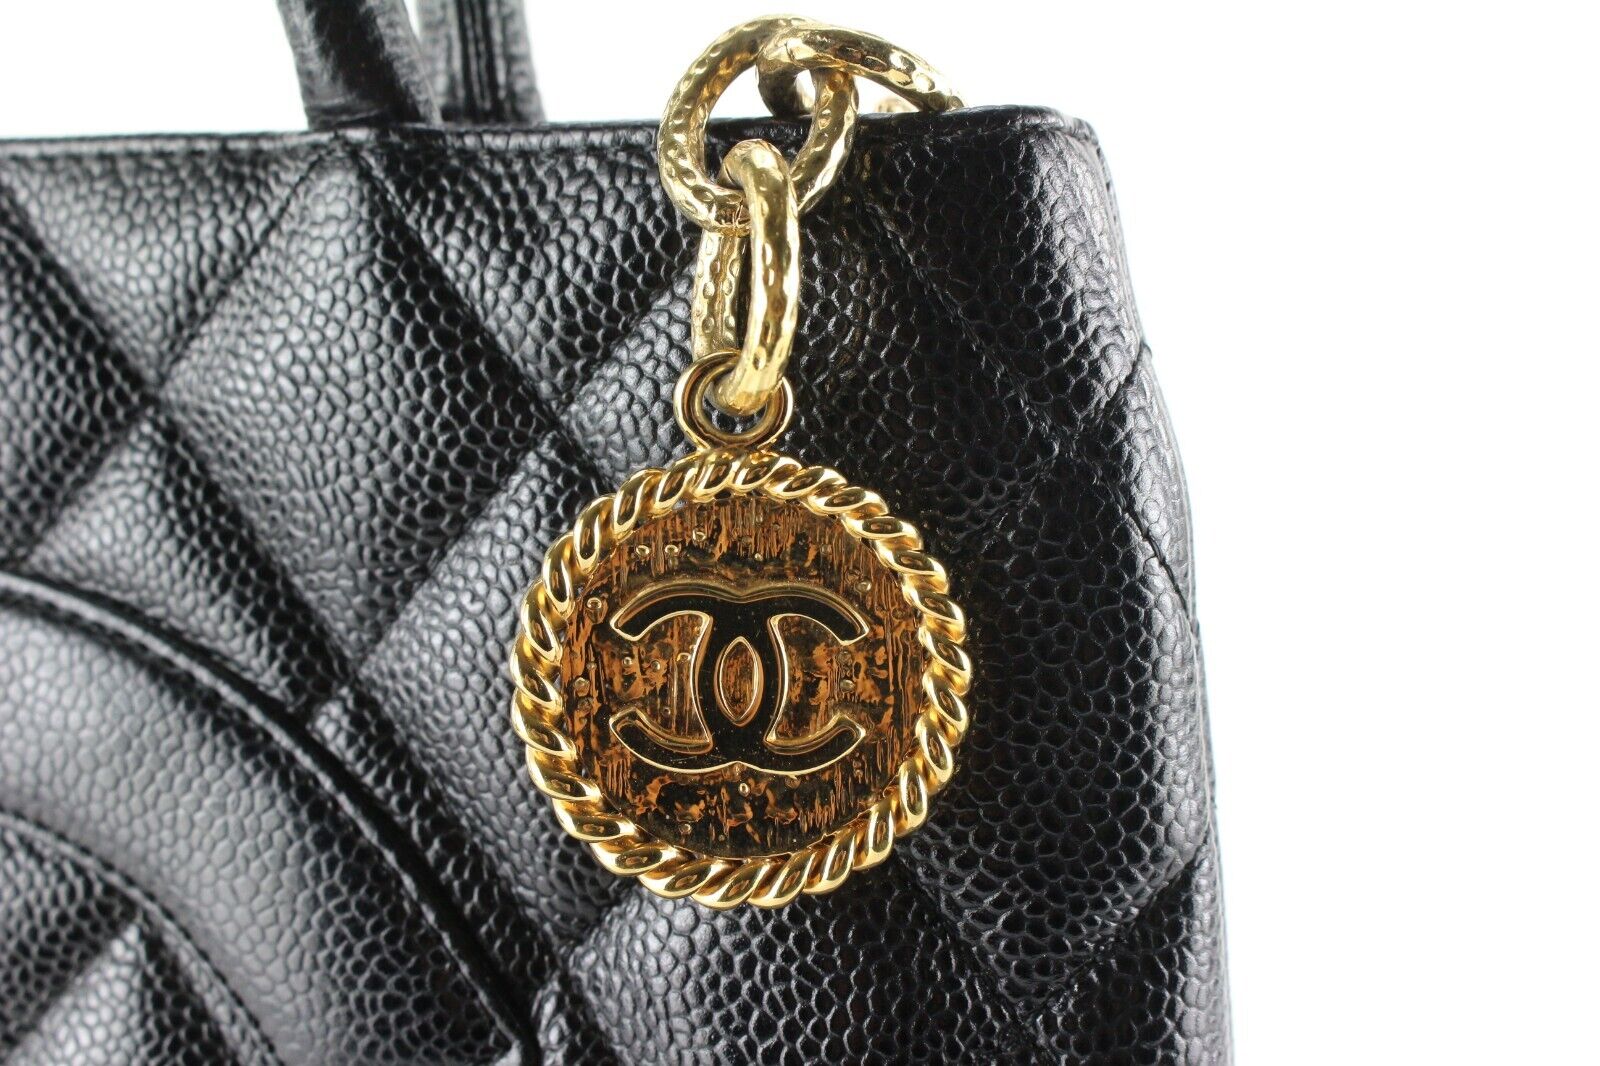 Chanel Black Quilted Caviar Leather Medallion Tote Chanel